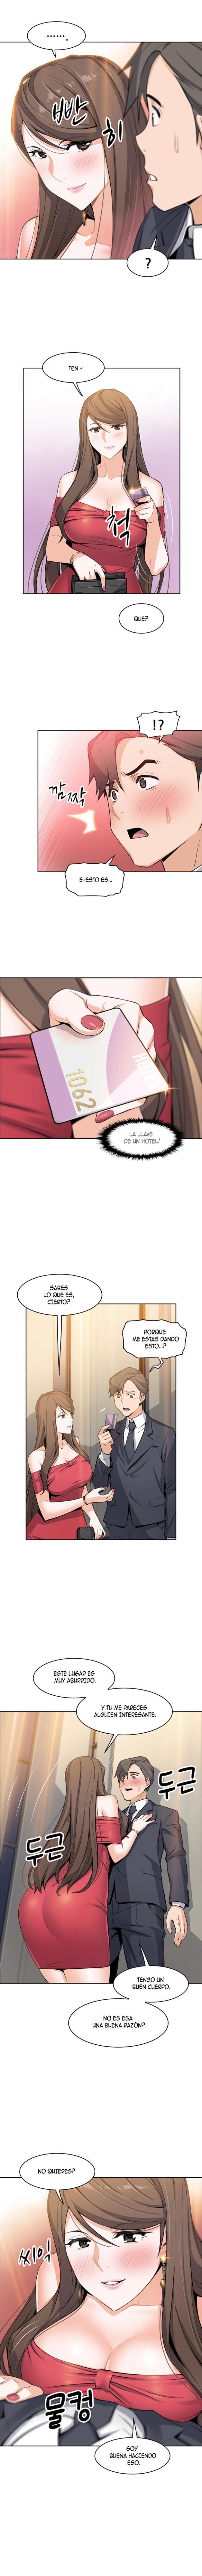 Housekeeper [Neck Pillow, Paper] Ch.49/49 [English] [Manhwa PDF] Completed 69